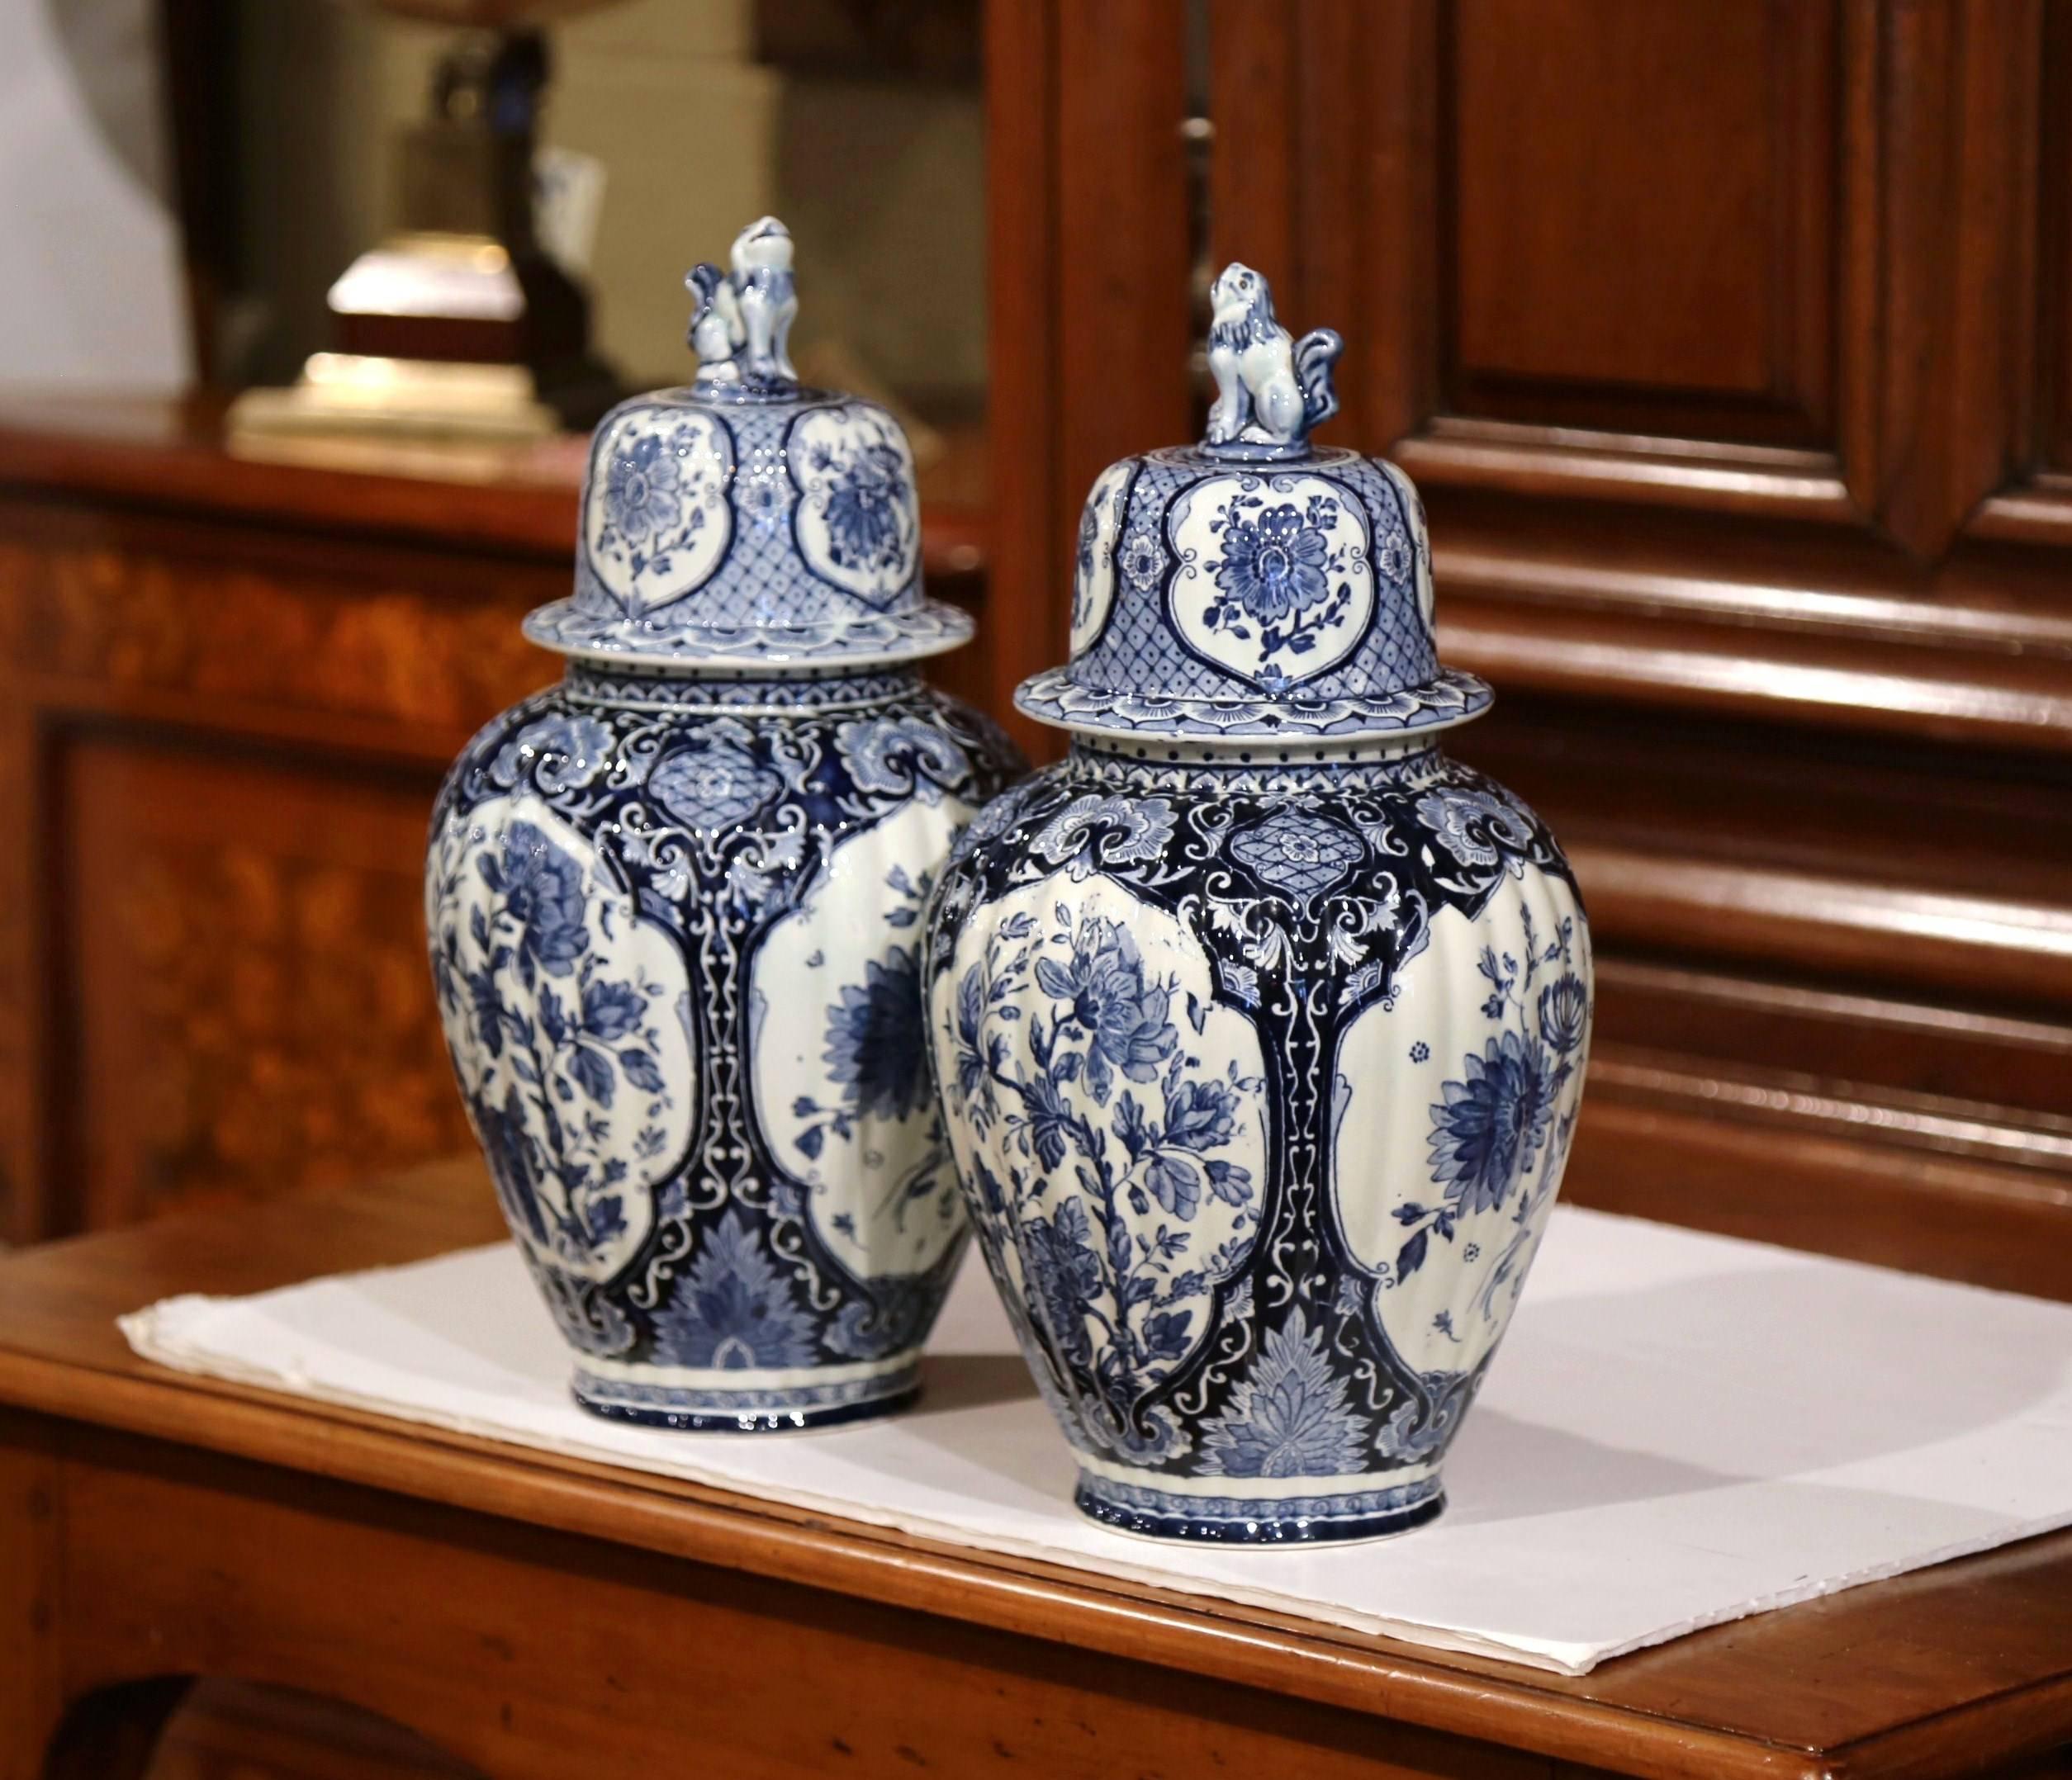 Place this elegant pair of vintage ceramic ginger jars on a mantel; crafted in Holland, circa 1920, the faience potiches feature hand painted medallions with Classic Dutch flower and foliage decor. The traditional blue and white jars are round in